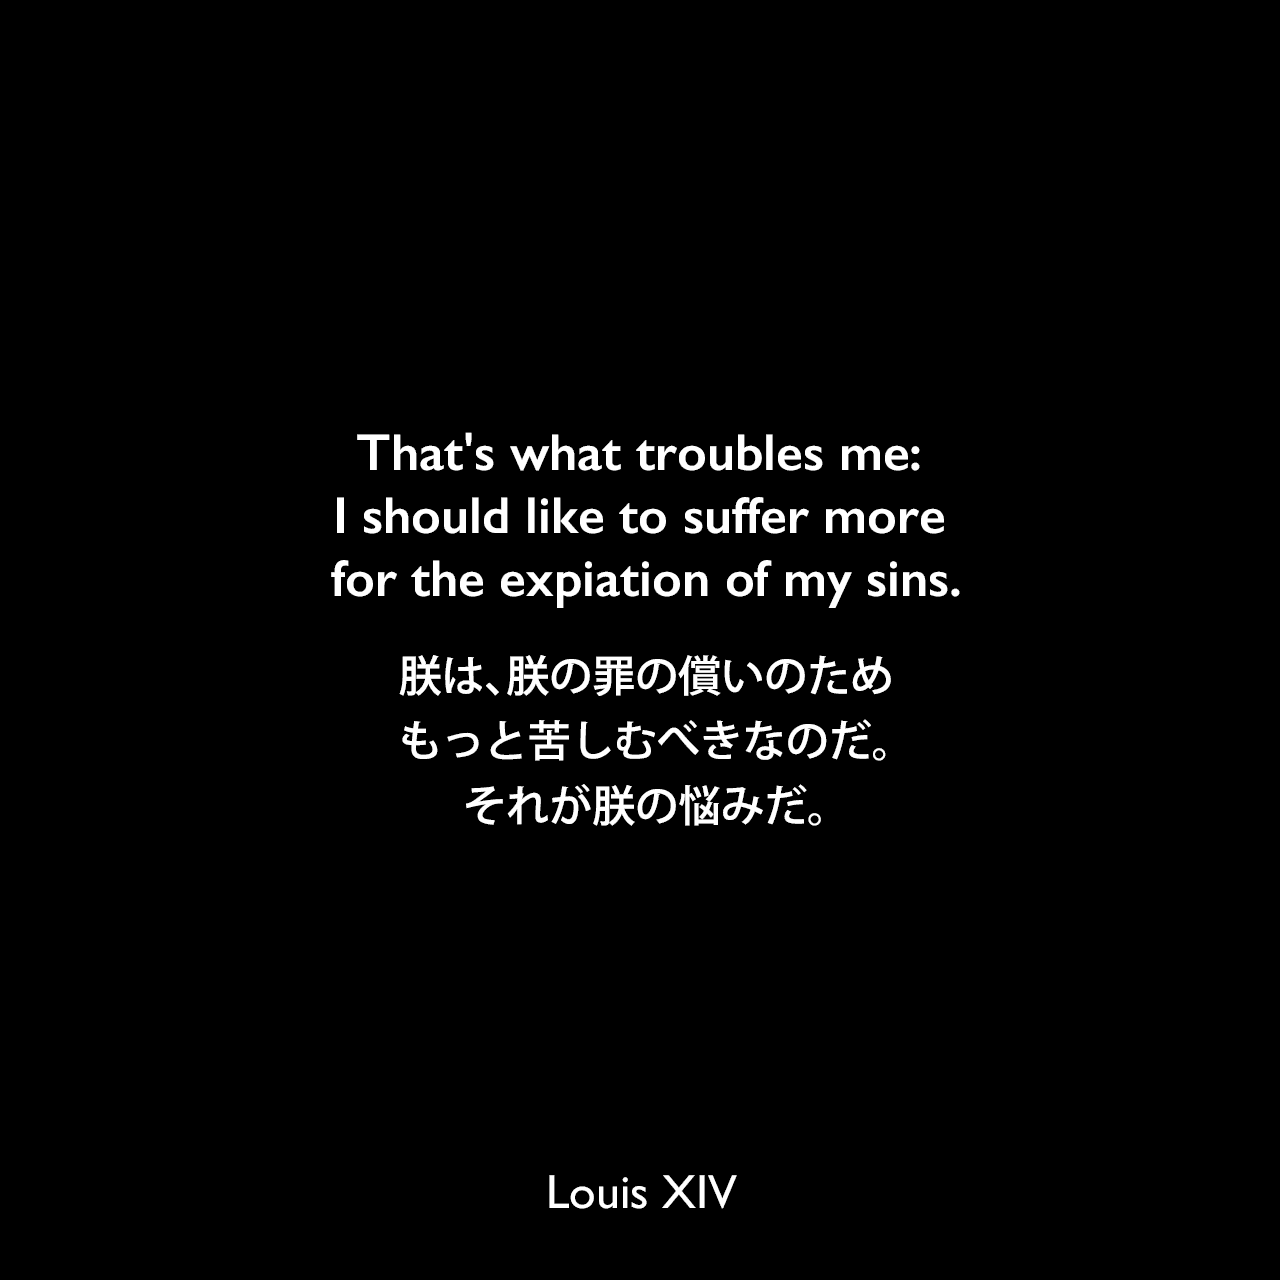 That's what troubles me: I should like to suffer more for the expiation of my sins.朕は、朕の罪の償いのため、もっと苦しむべきなのだ。それが朕の悩みだ。Louis XIV